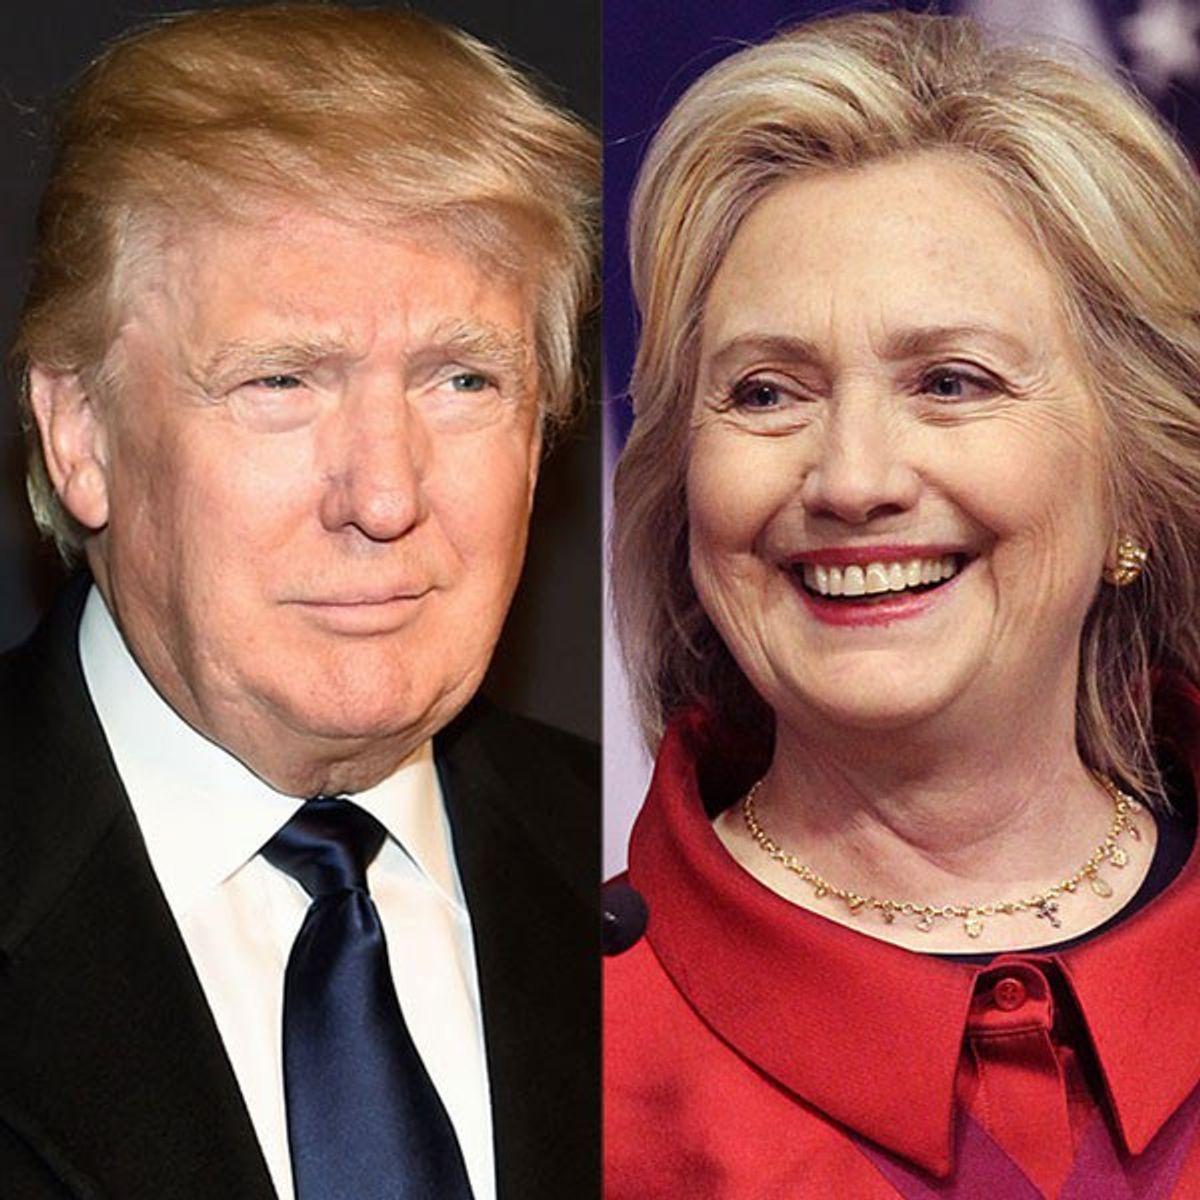 Election 2016: Let's Move On